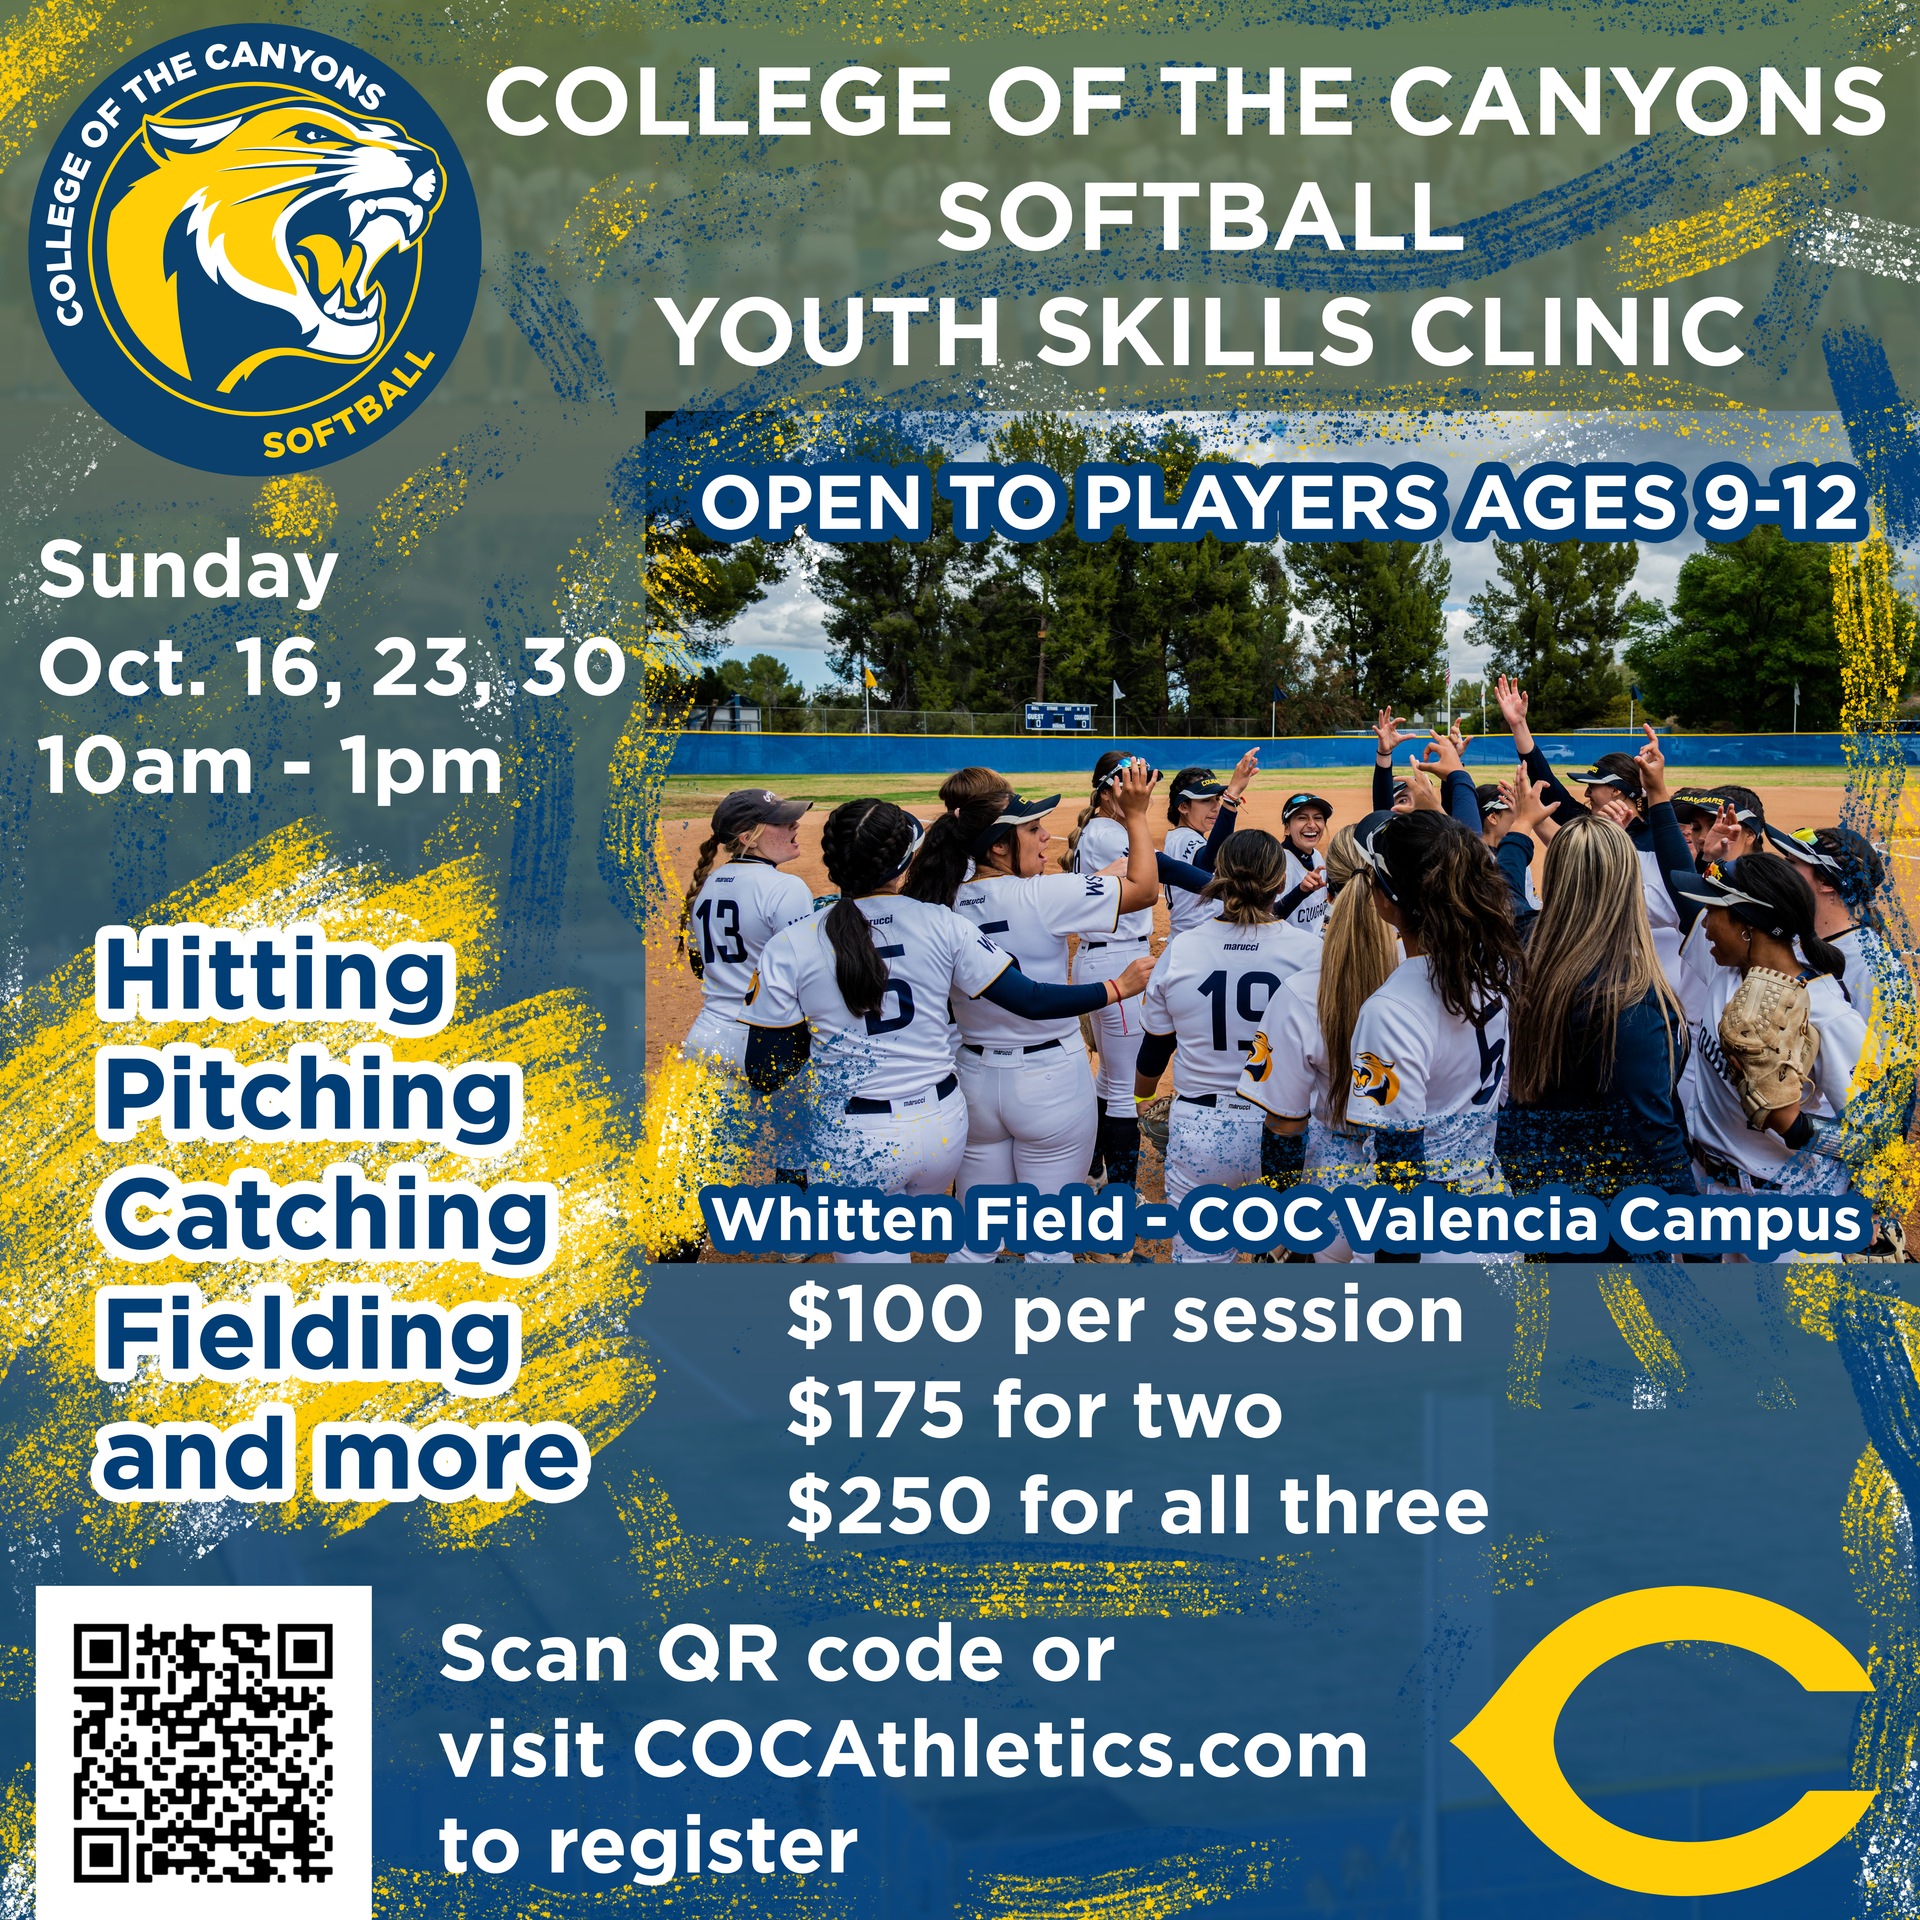 College of the Canyons softball youth clinic information graphic.